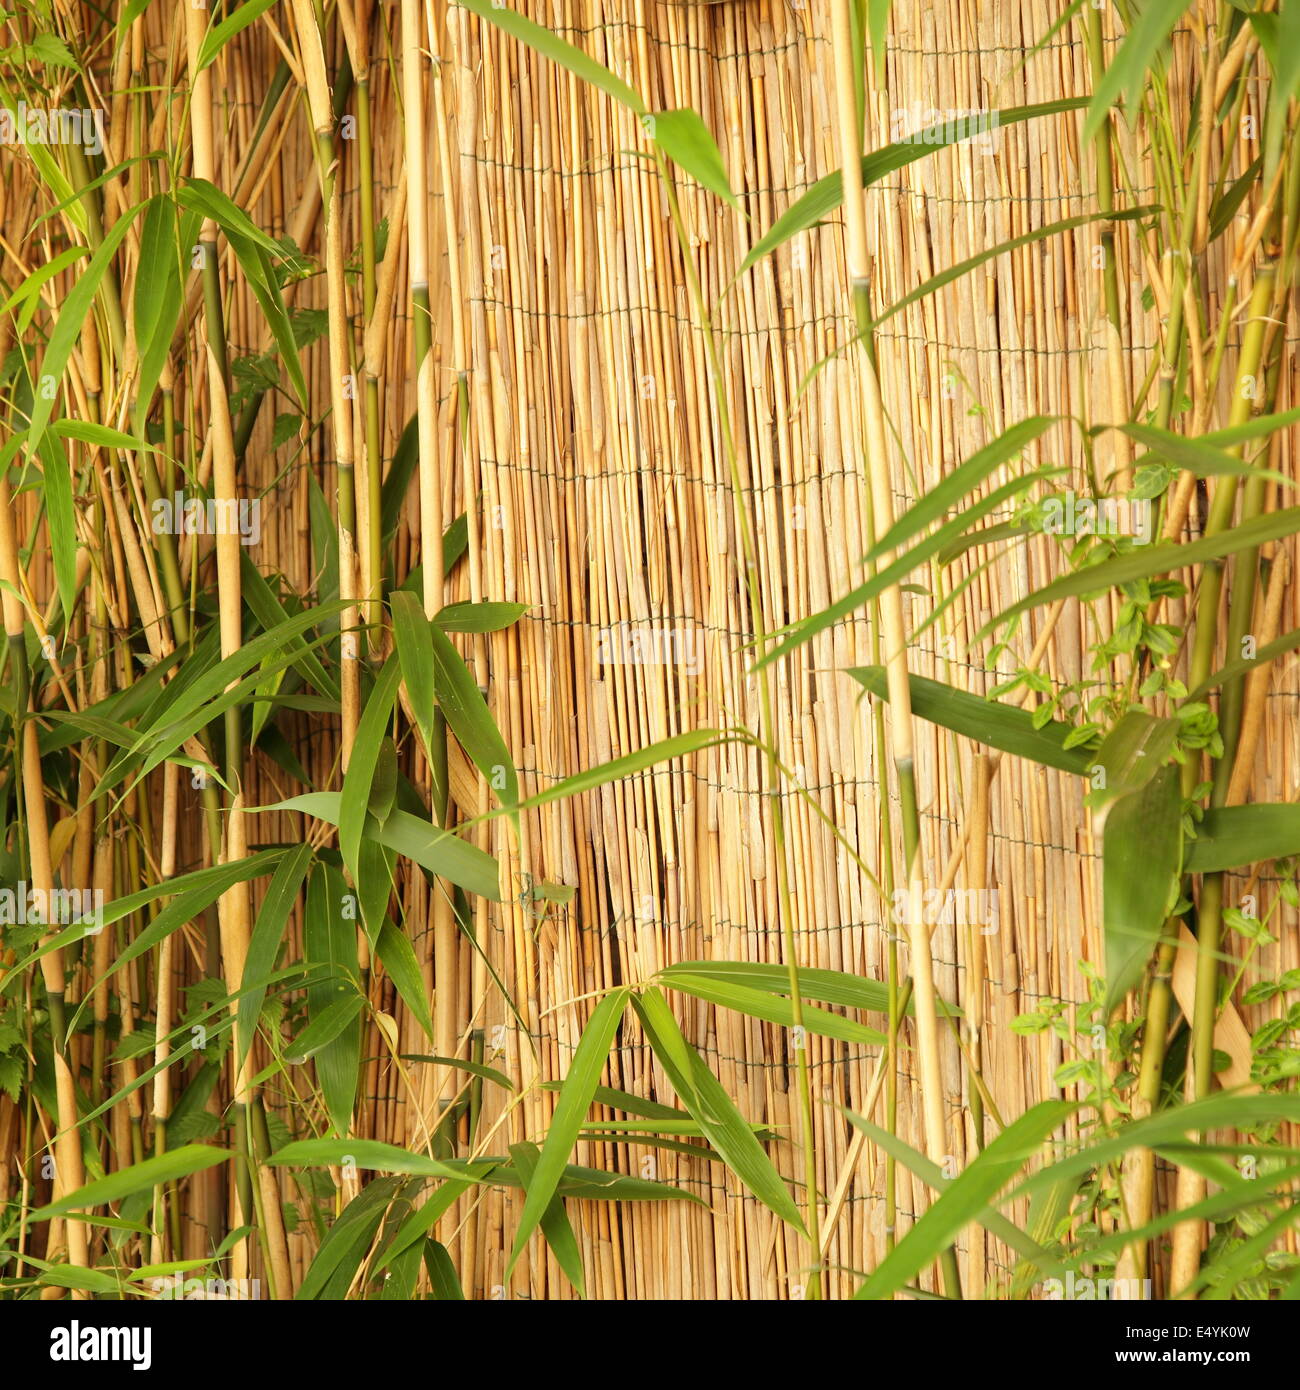 Fresh ornamental bamboo with a bamboo fence Stock Photo